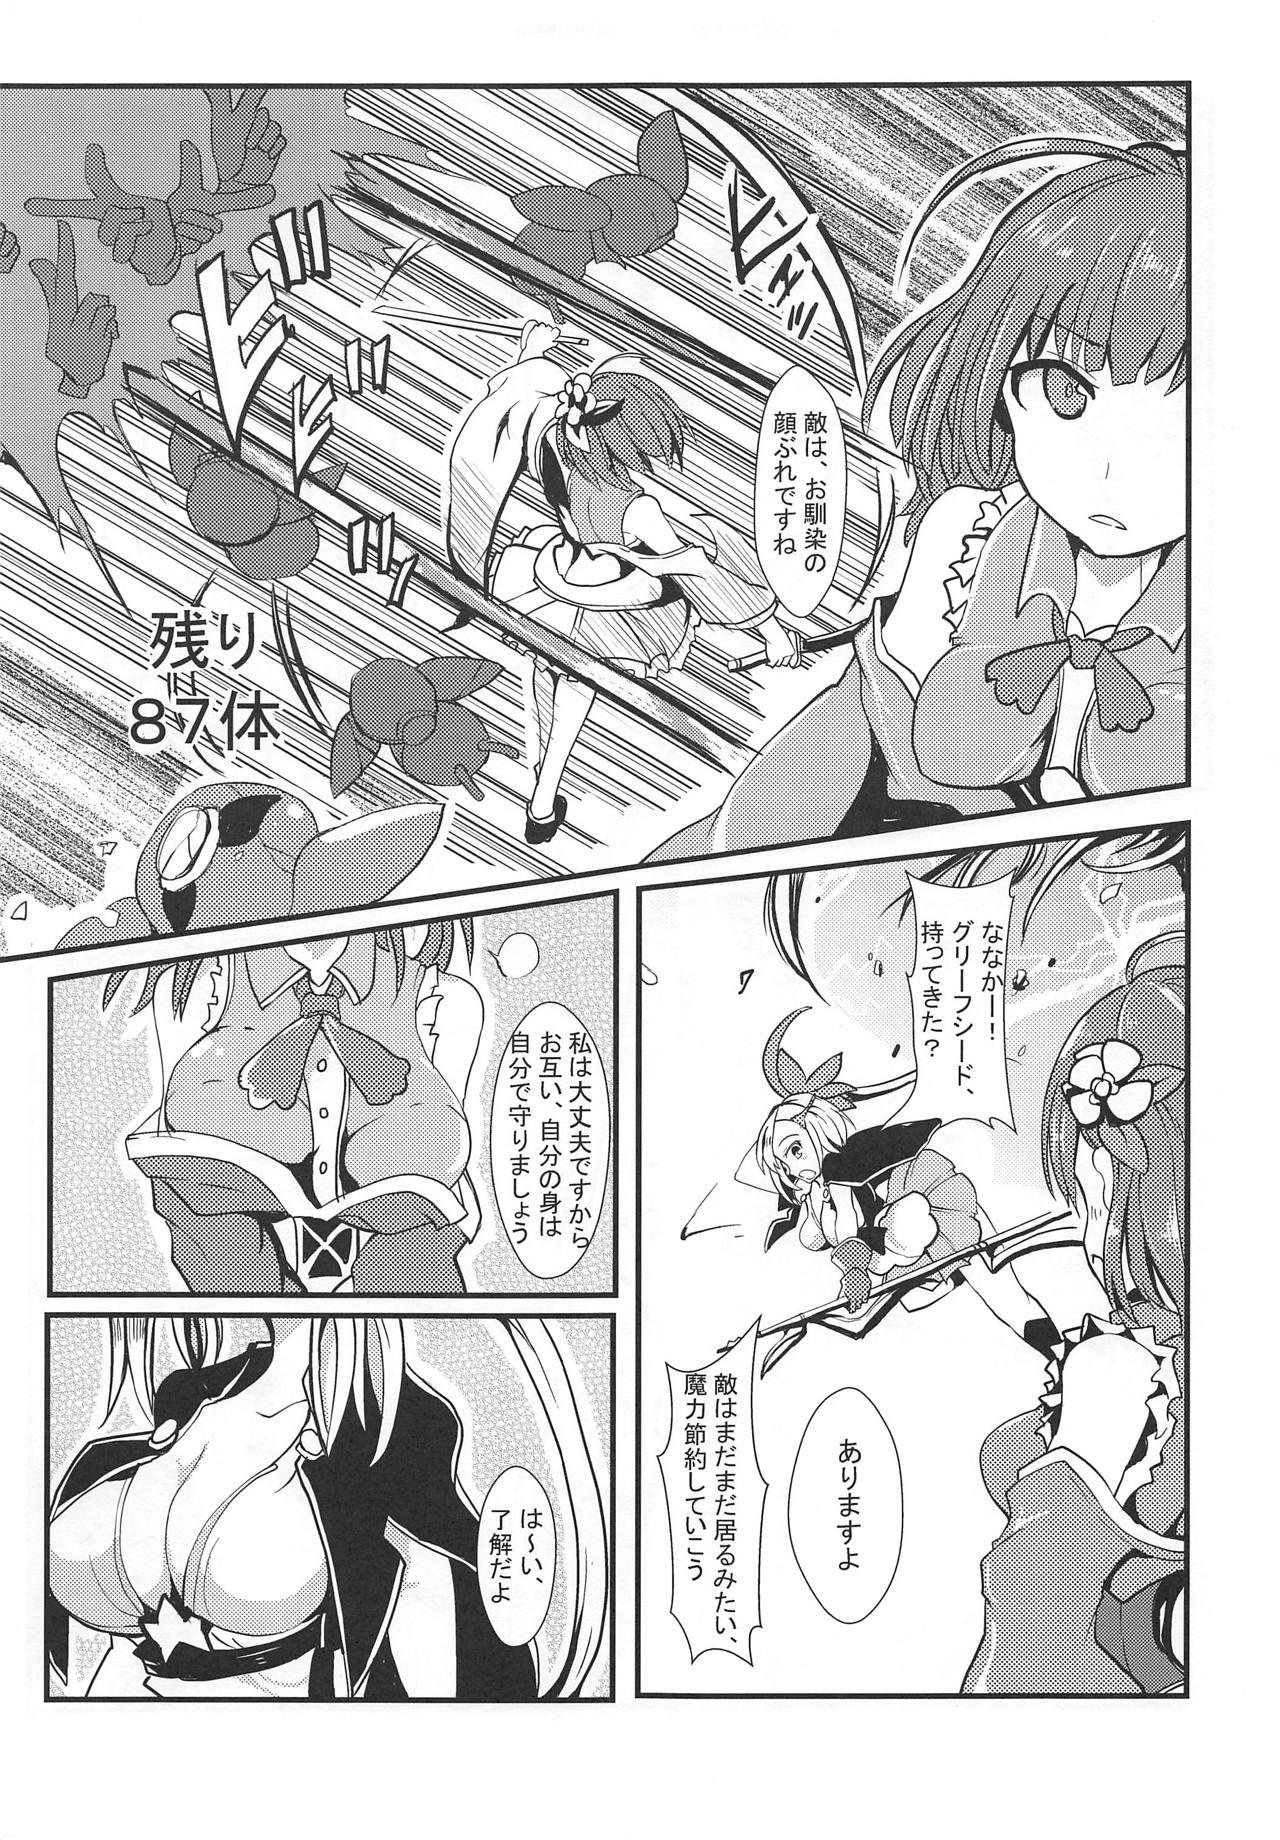 From Banmaden - Puella magi madoka magica side story magia record Butthole - Page 4